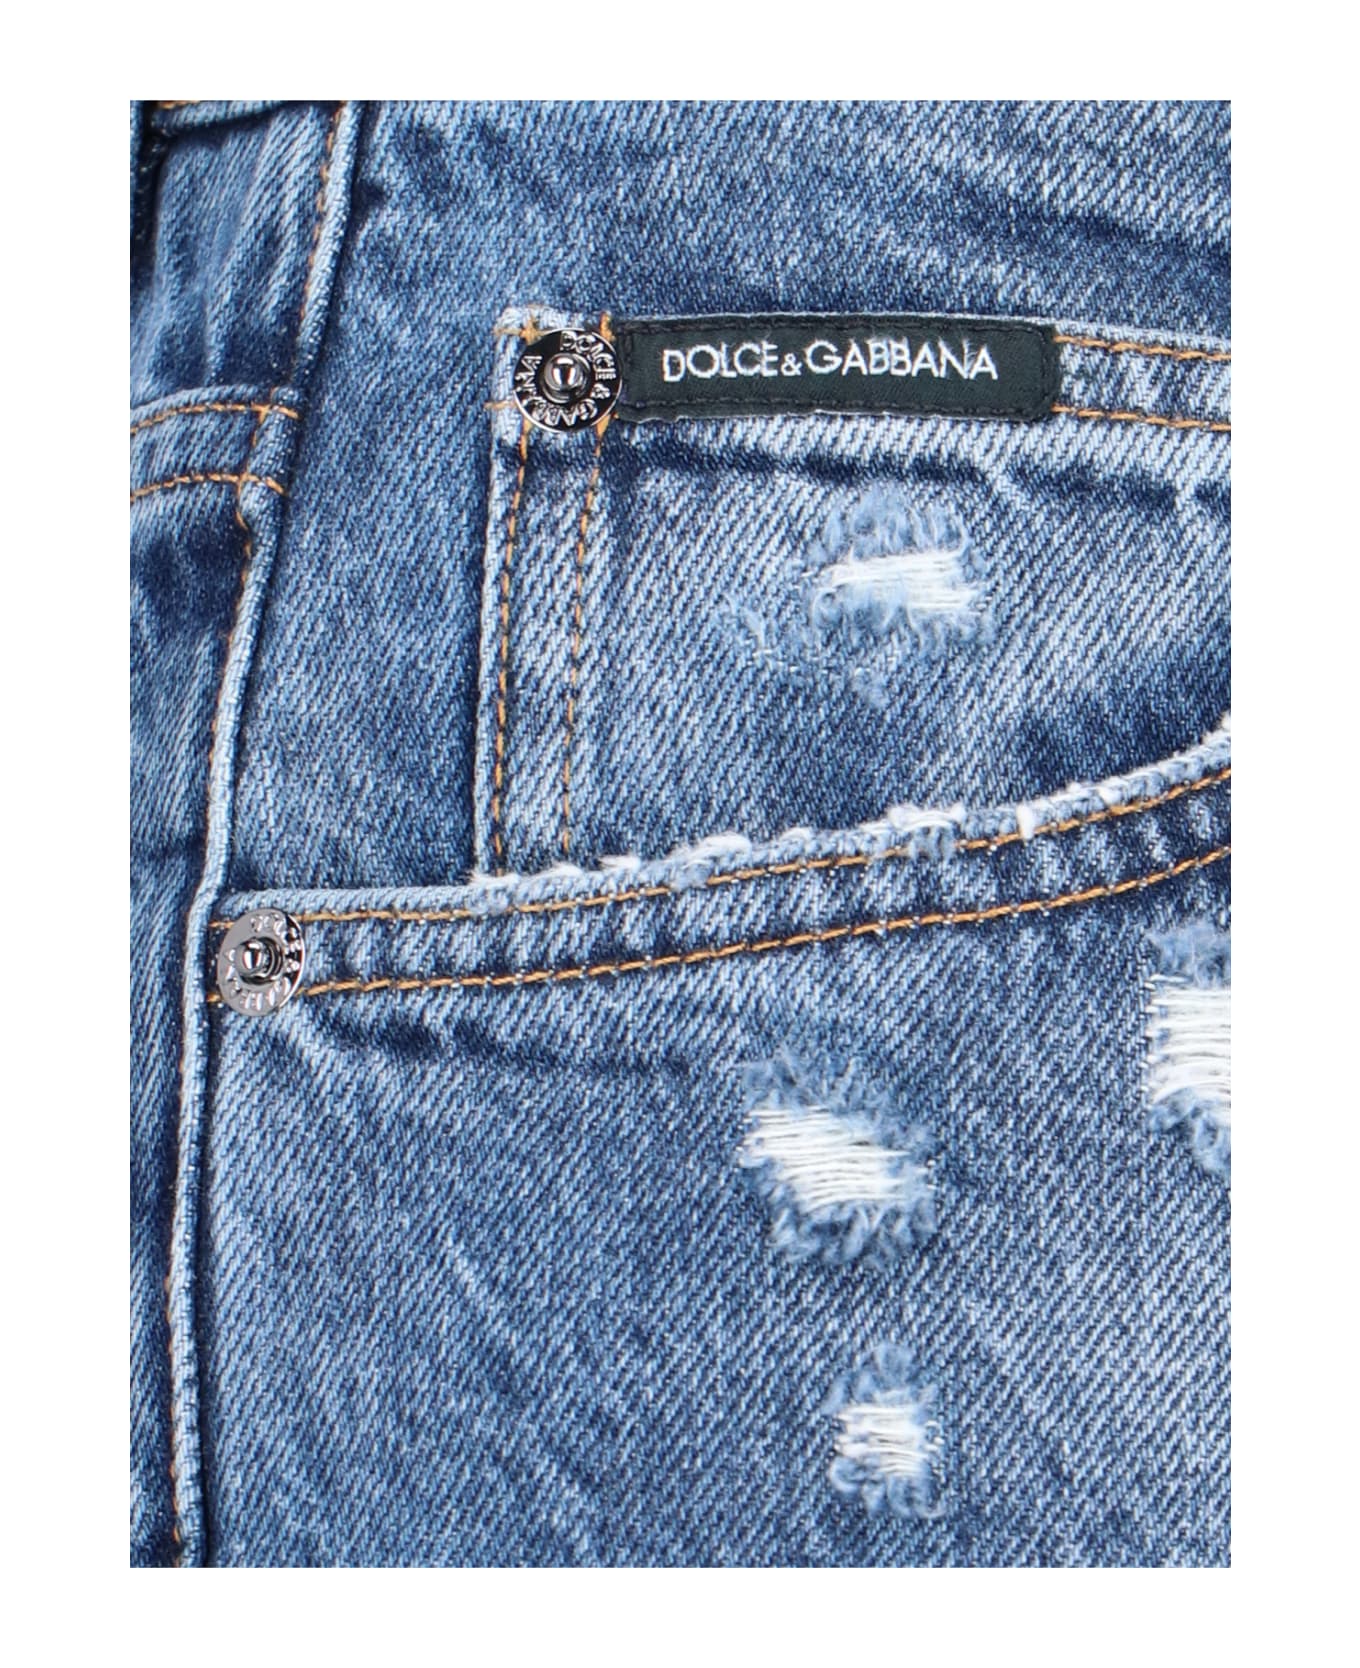 Dolce & Gabbana Ripped Jeans - Blue